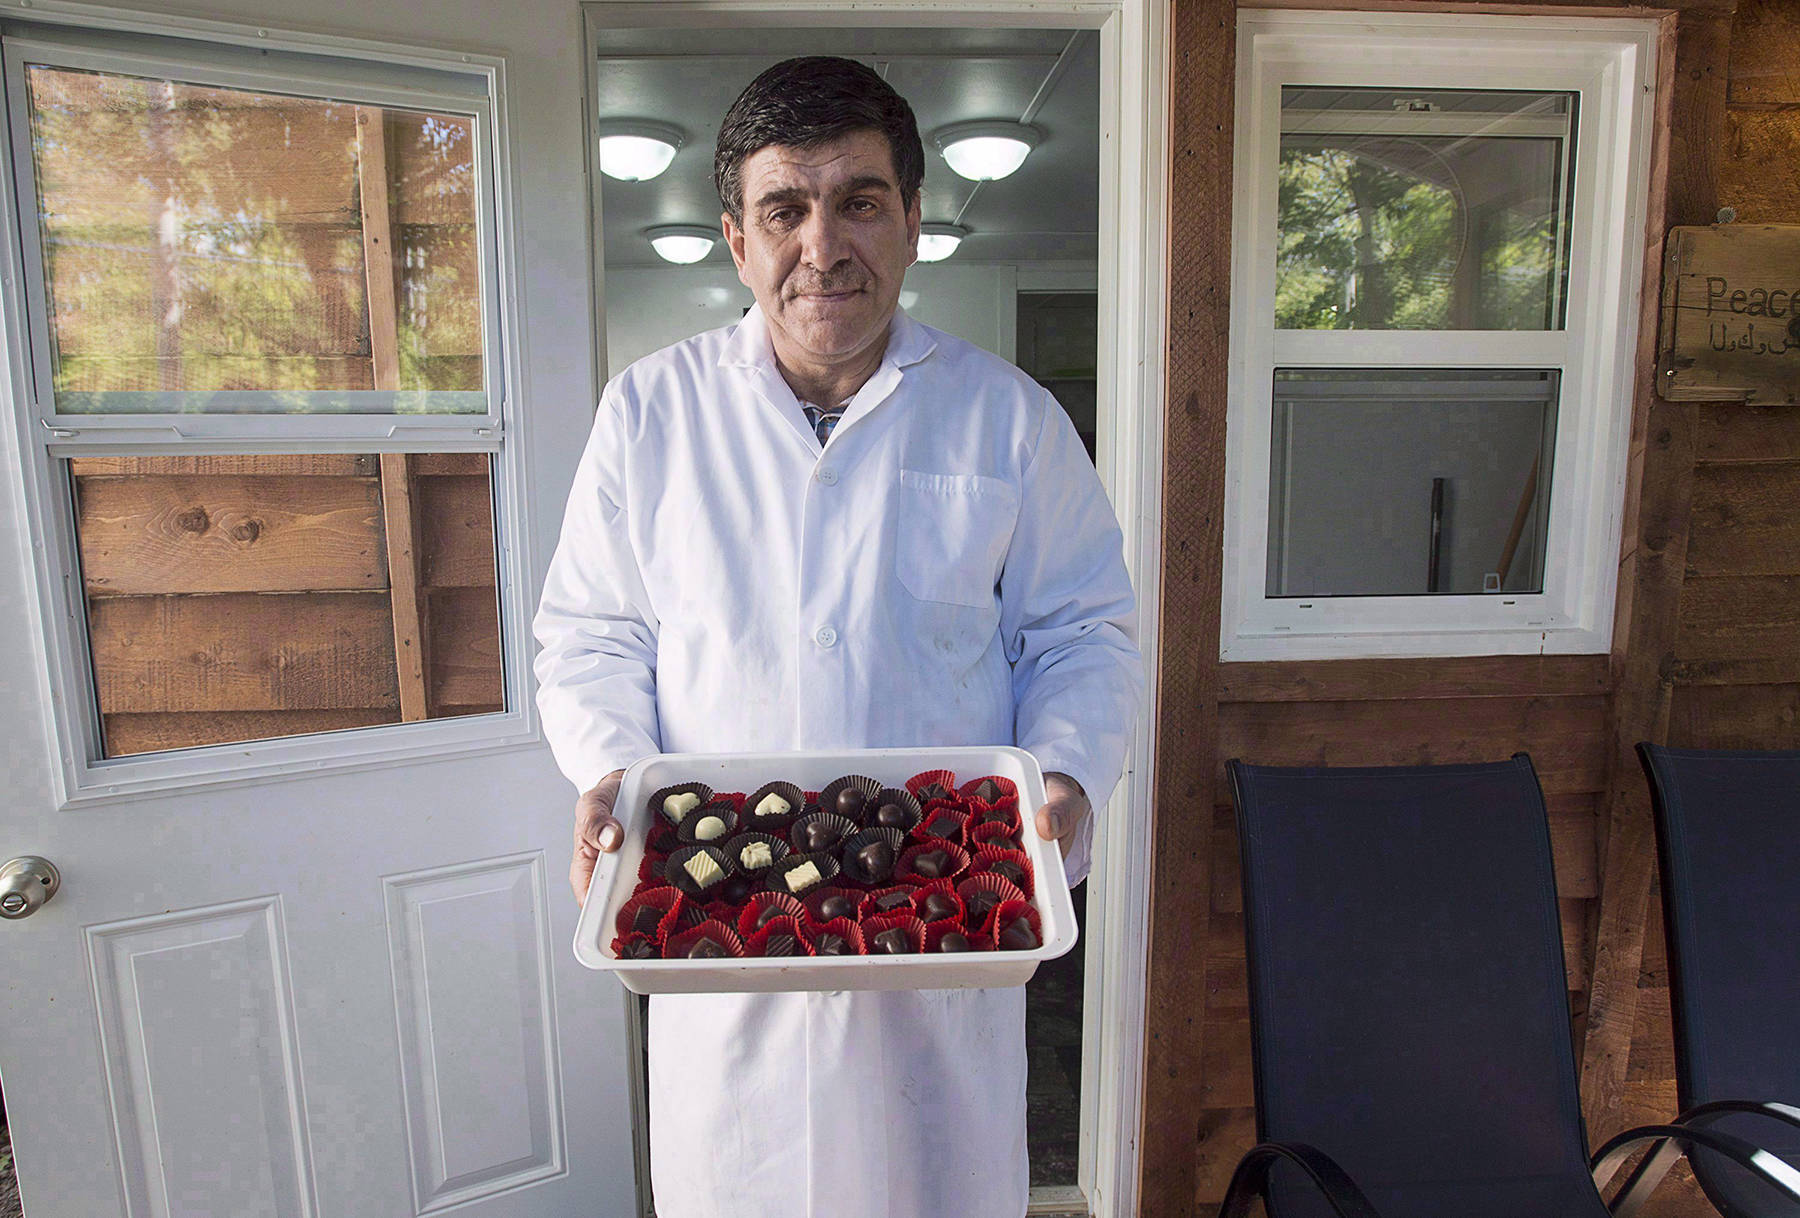 Assam Hadhad, a Syrian refugee who arrived in Canada last year, displays a tray of chocolates at his shop, Peace by Chocolate, in Antigonish, N.S. on Wednesday, Sept. 21, 2016. CEO Tareq Hadhad has plans to hiring more refugees over the next three years. (Andrew Vaughan/The Canadian Press)